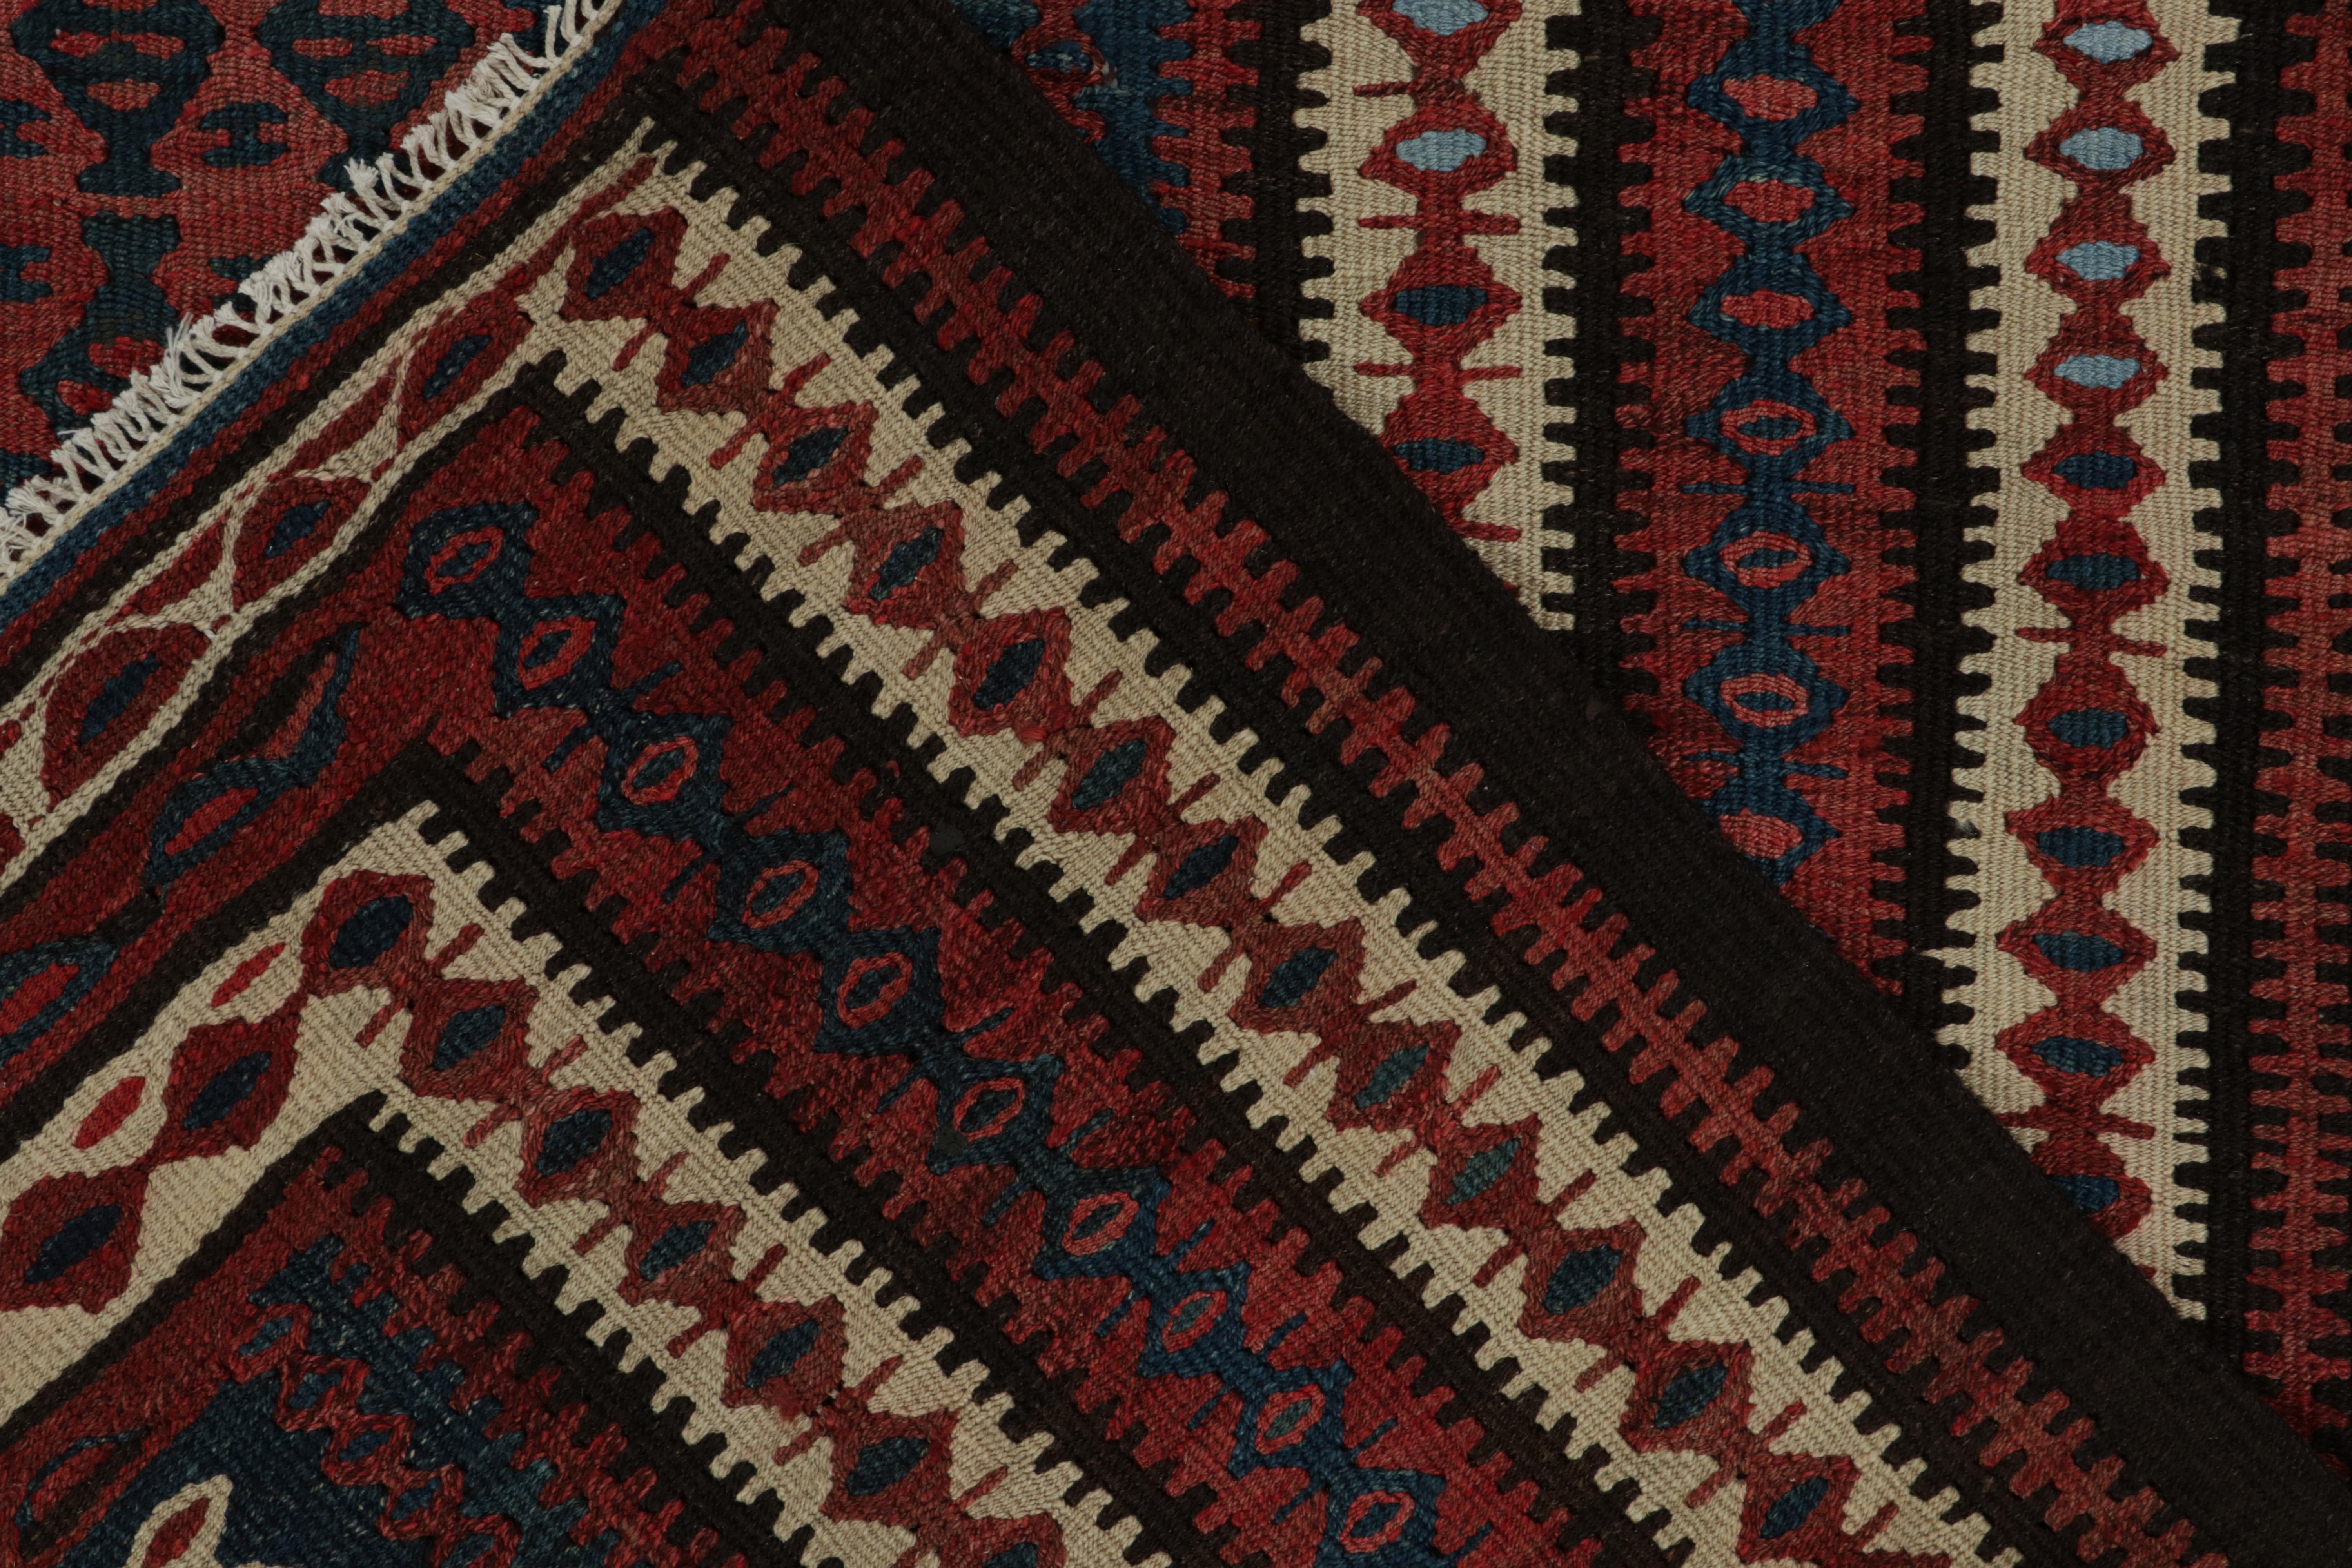 Hand-Knotted 1950s Vintage Kilim Rug in Red, Blue and Brown Geometric Patterns by Rug & Kilim For Sale